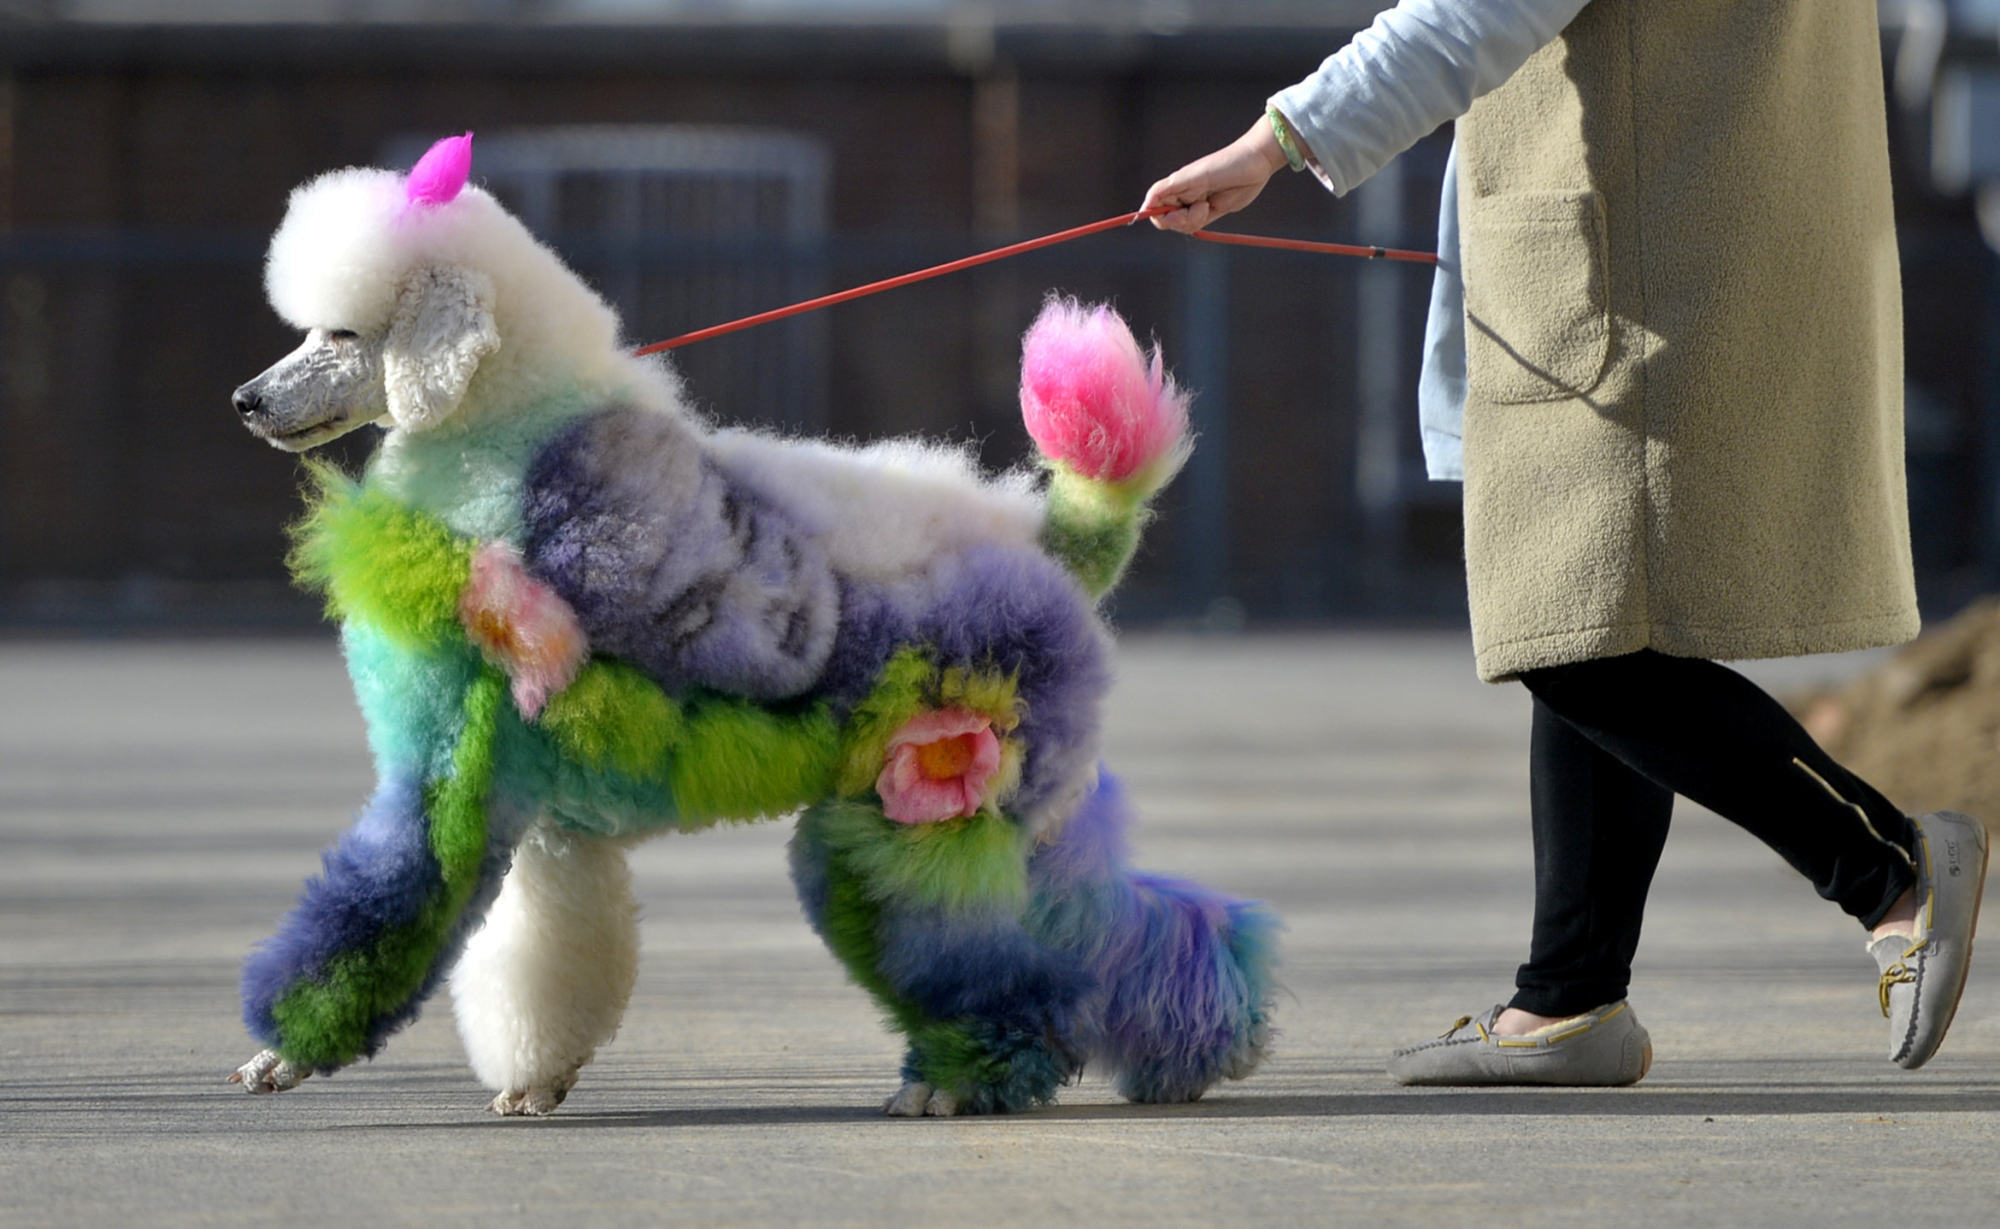 Pet ownership is growing rapidly in China and creating an economic boom in its wake. Photo: Reuters